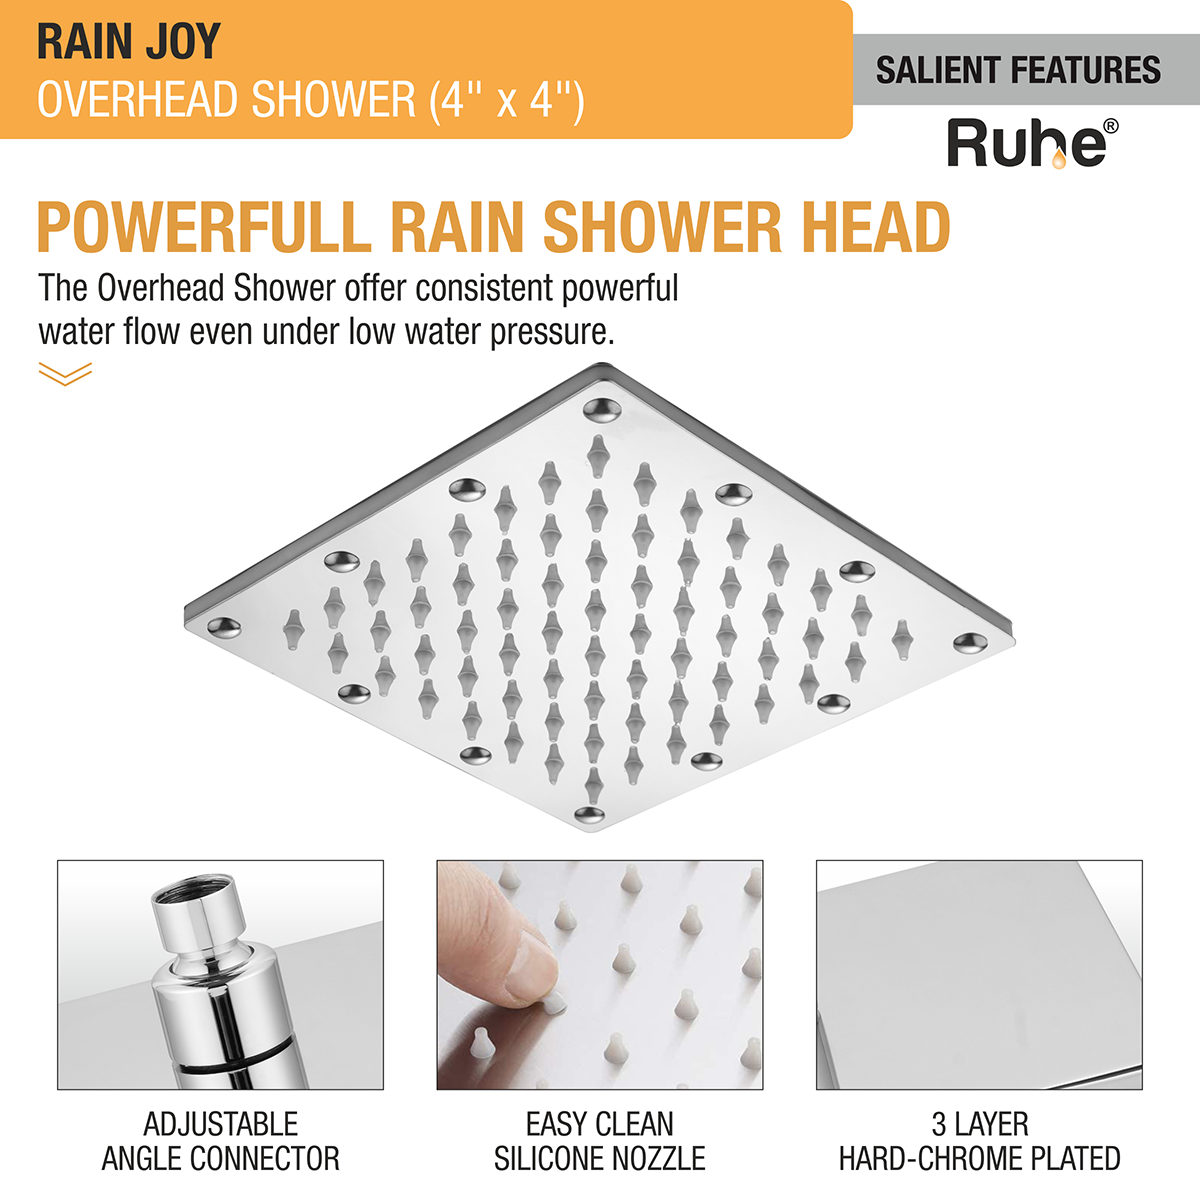 Rain Joy 304-Grade Overhead Shower (4 x 4 Inches) features and benefits